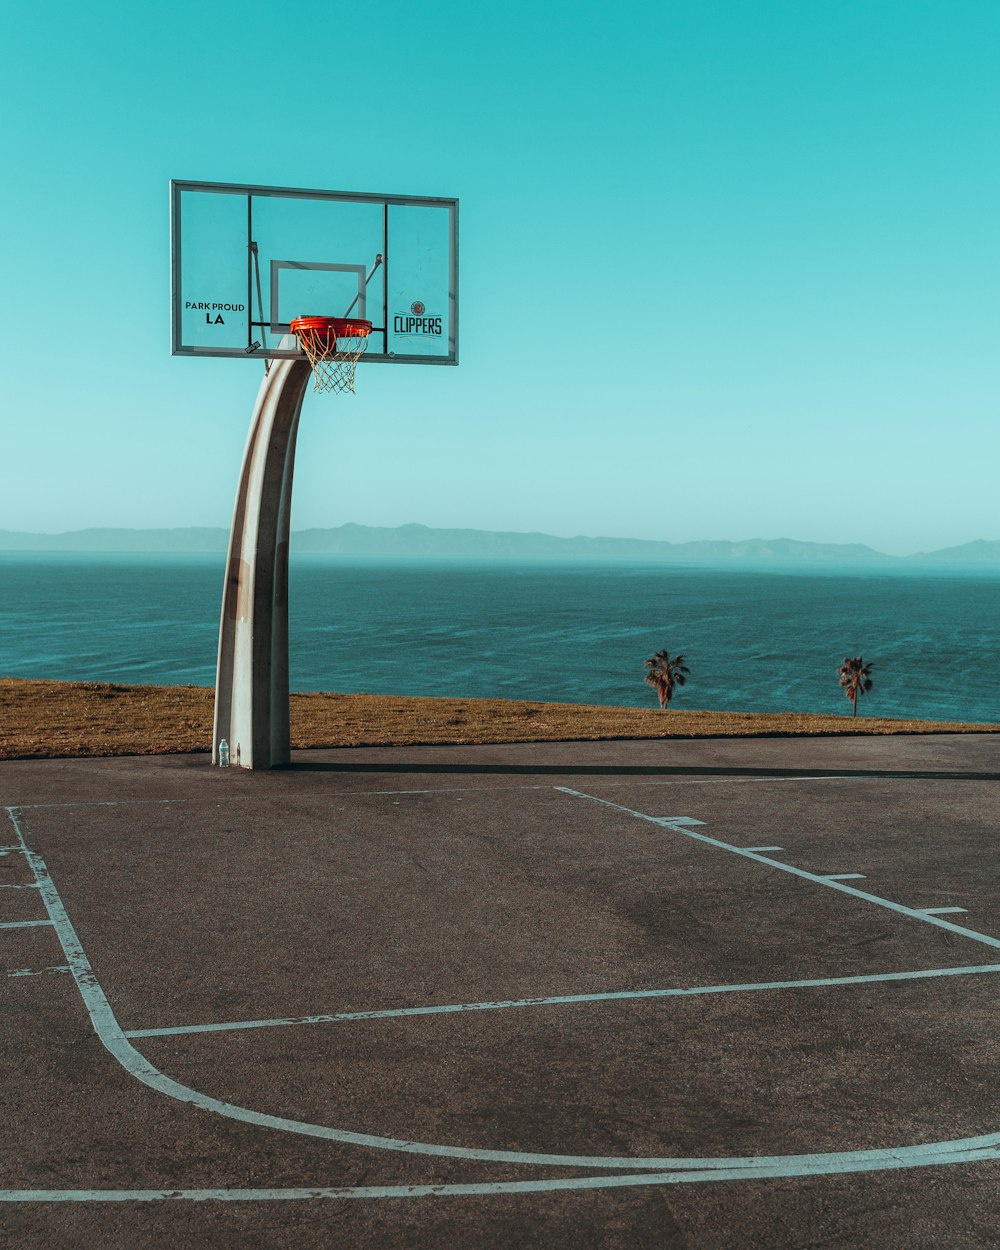 500+ Basketball Court Pictures | Download Free Images on Unsplash